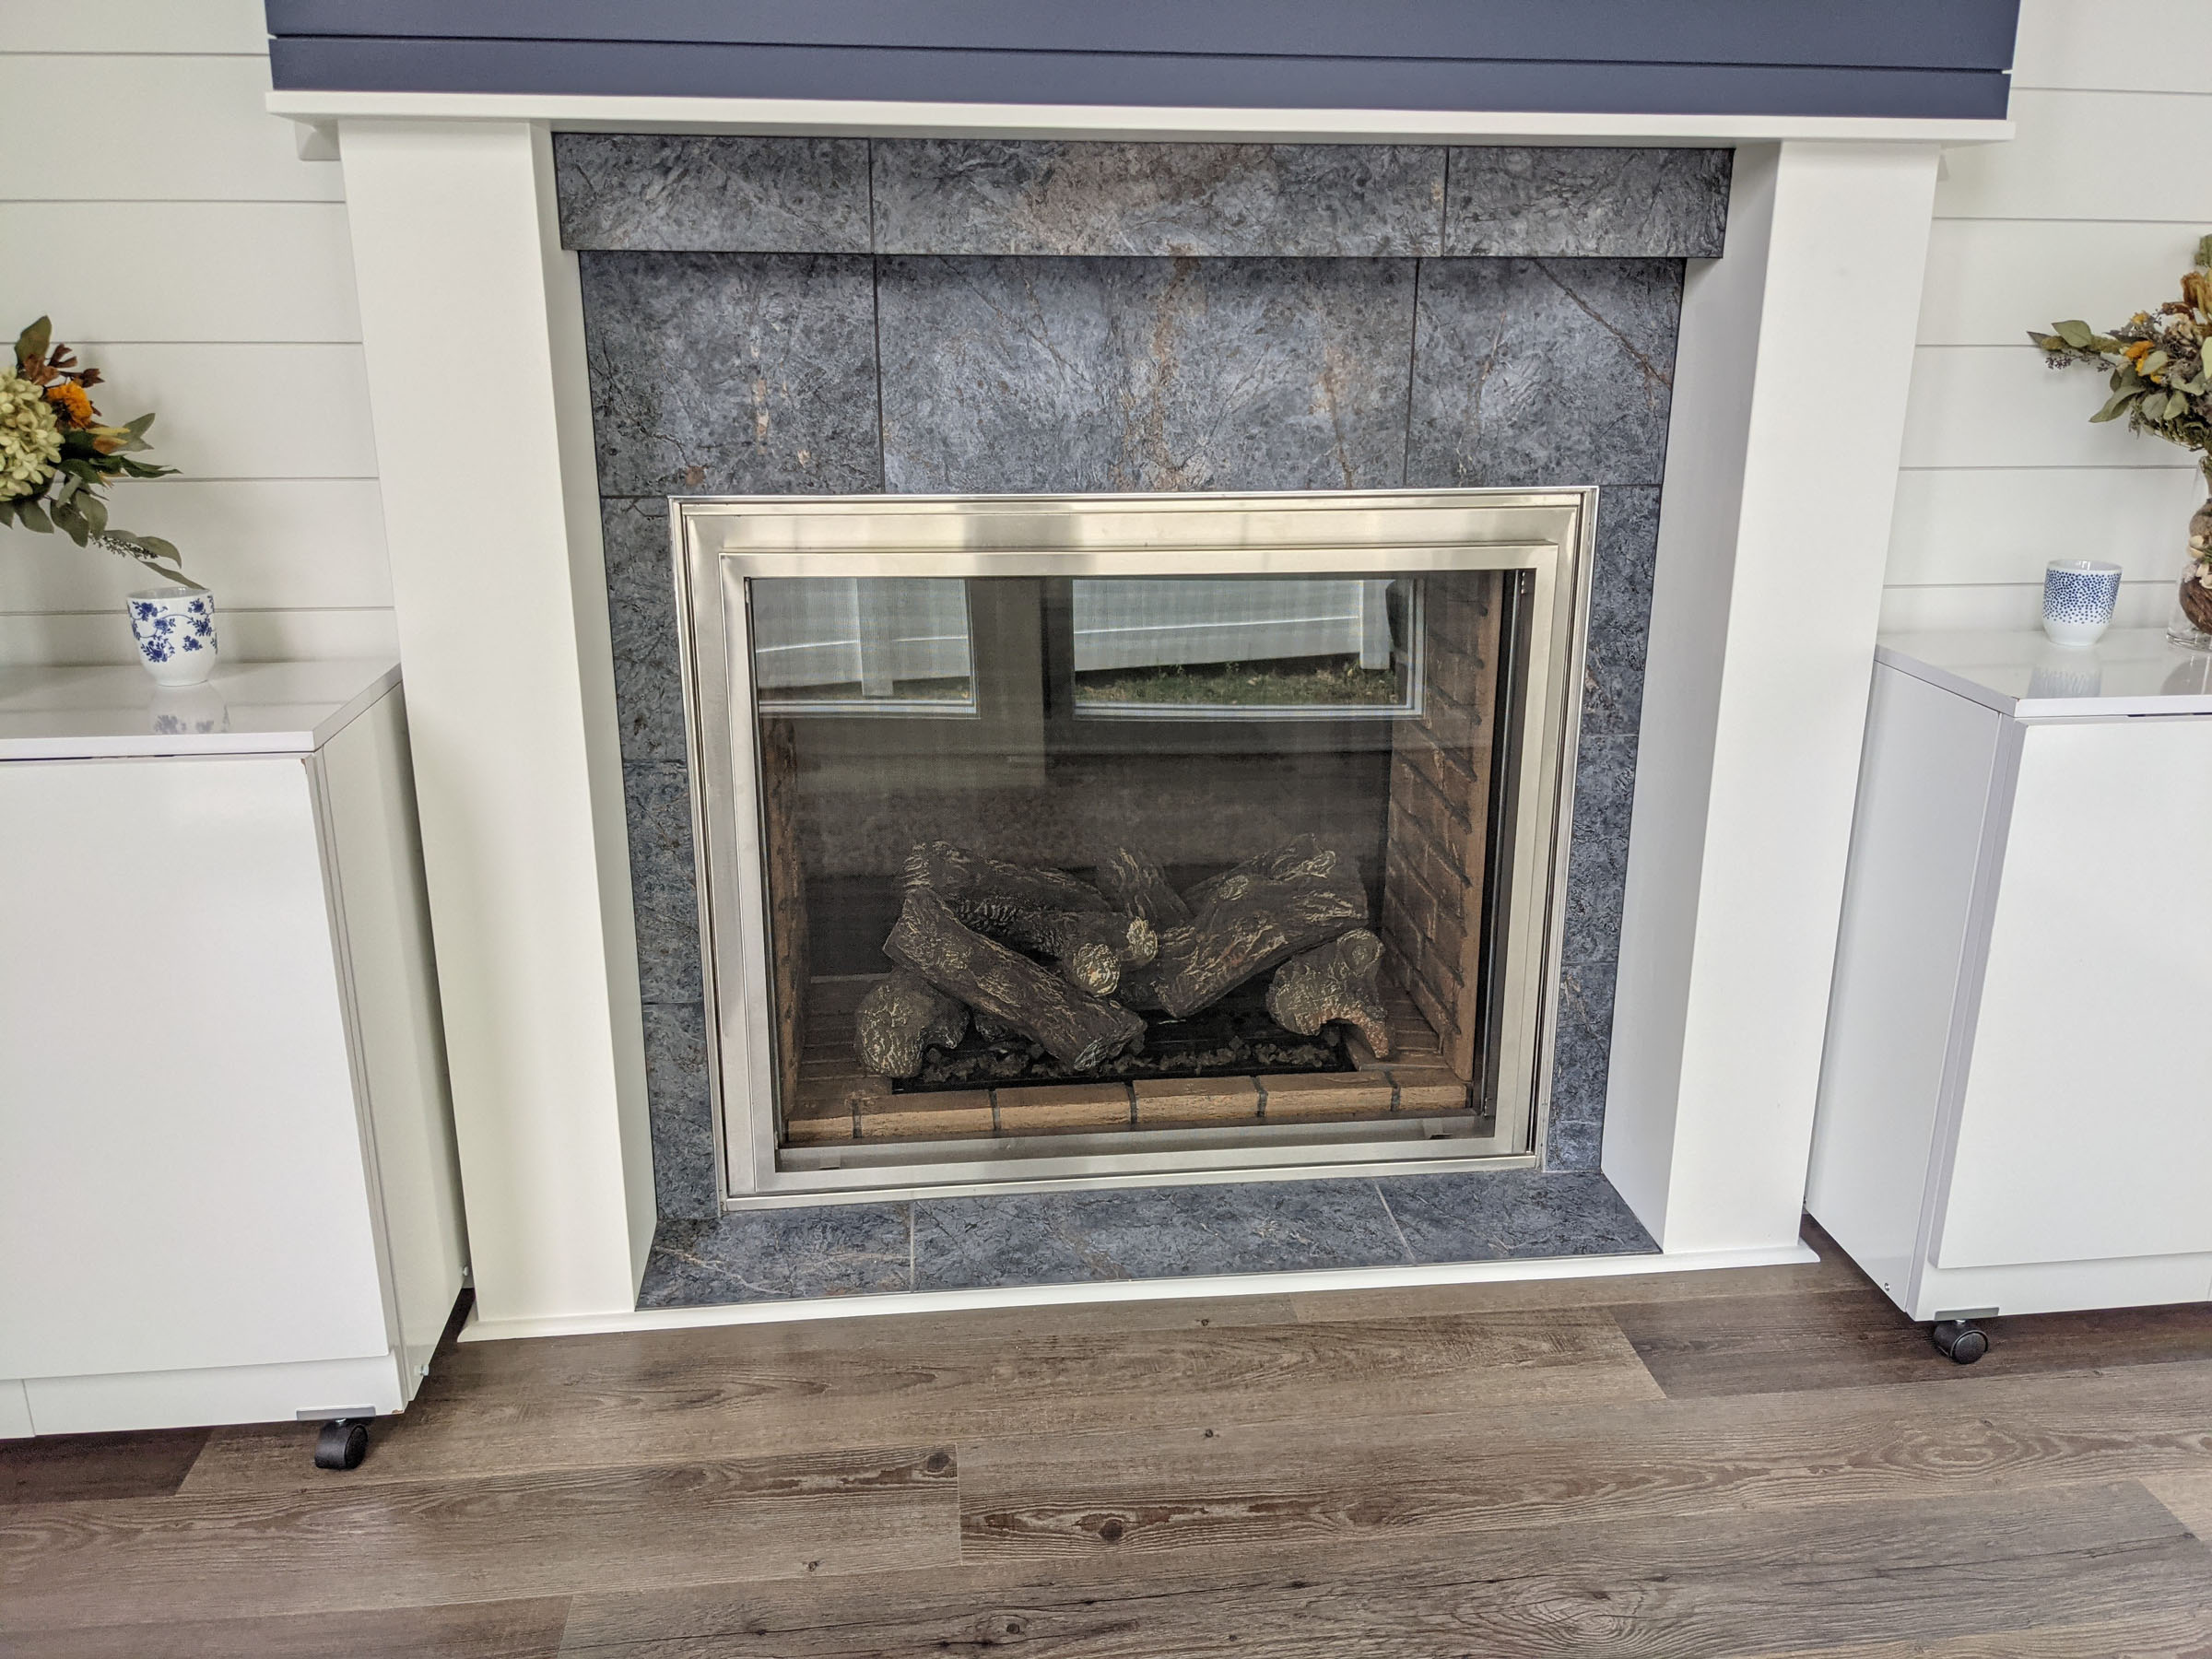 New fireplace & new tile fit in seamlessly!